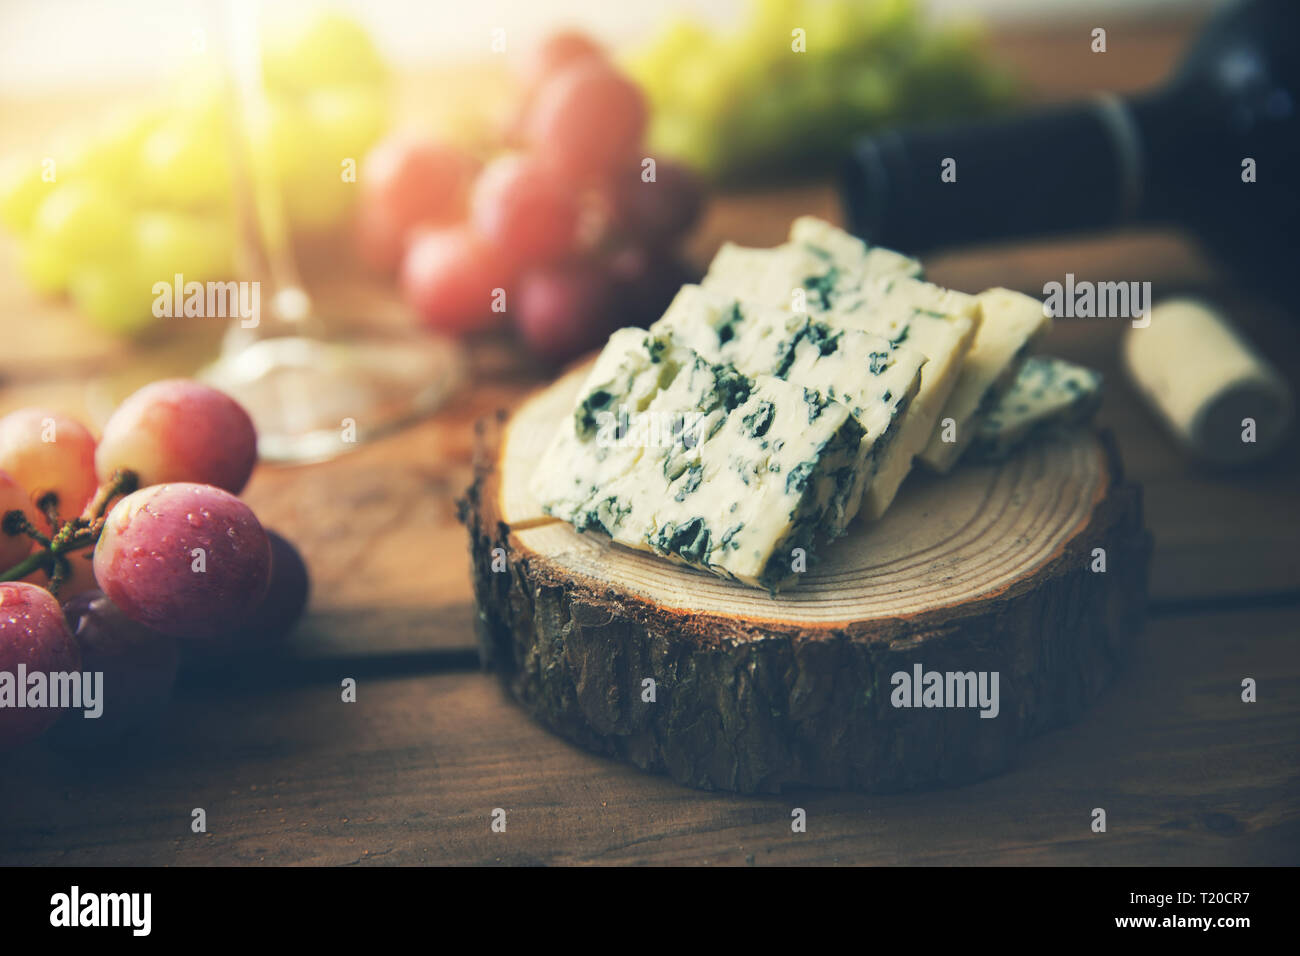 dor blue cheese on wood log slice with grapes and wine bottle Stock Photo